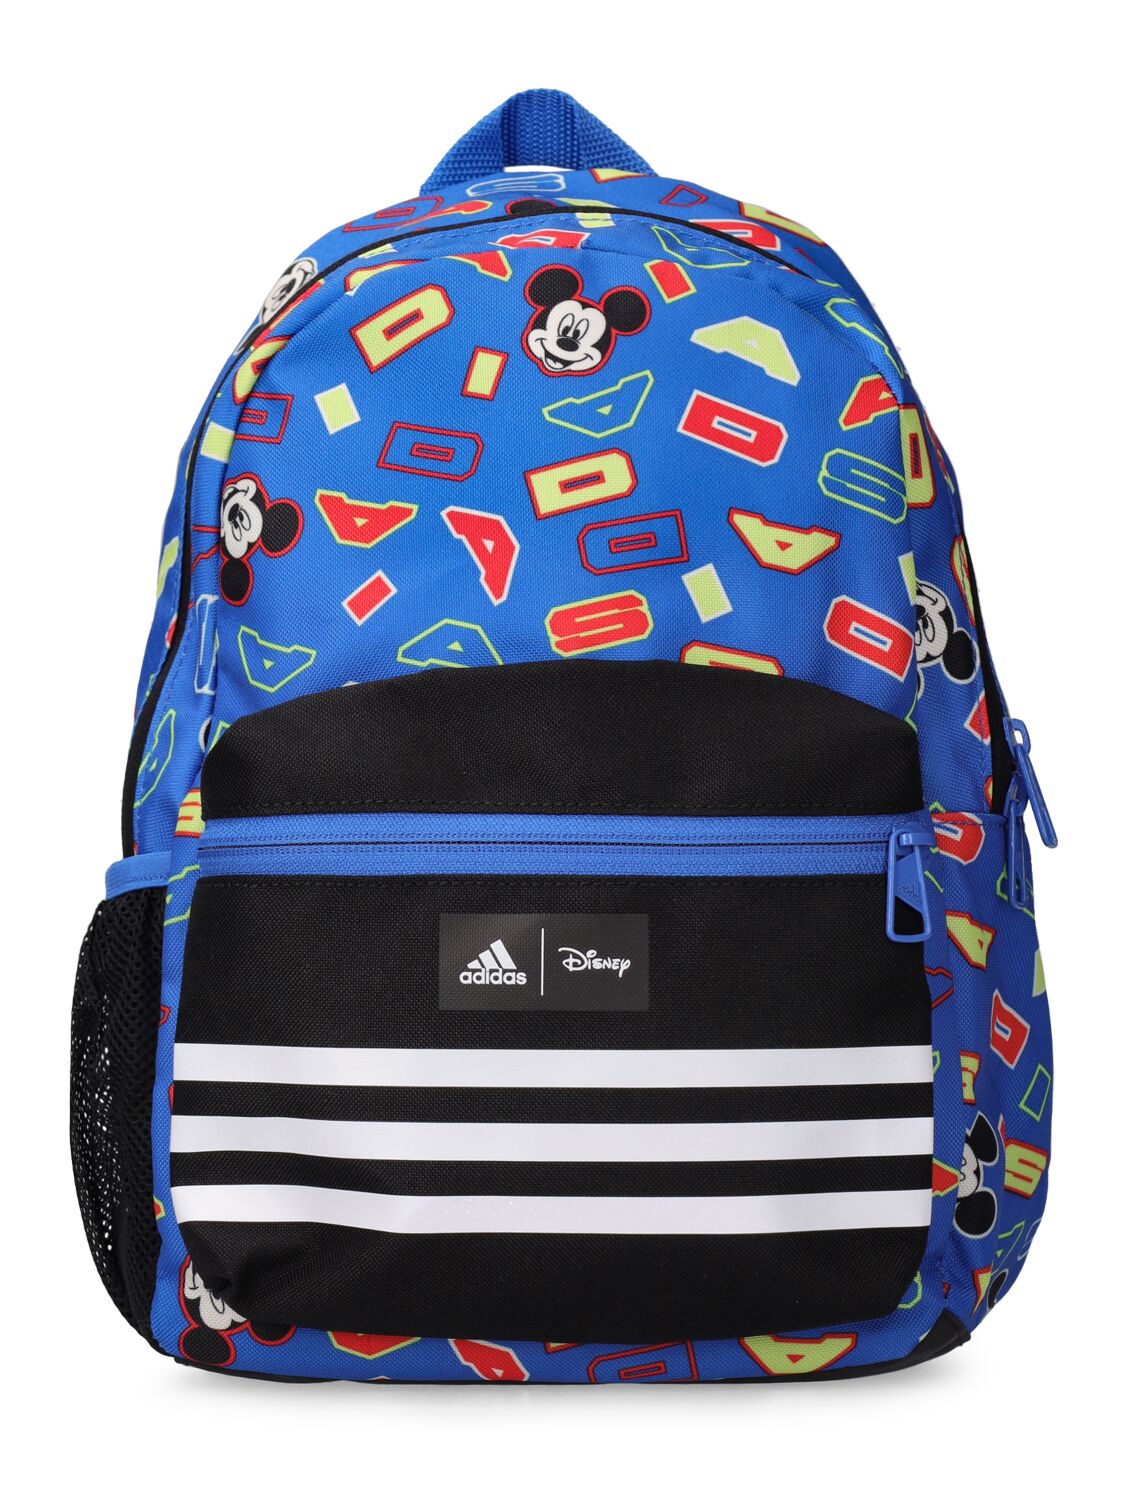 Mickey Mouse Recycled Poly Backpack - ADIDAS ORIGINALS - Modalova